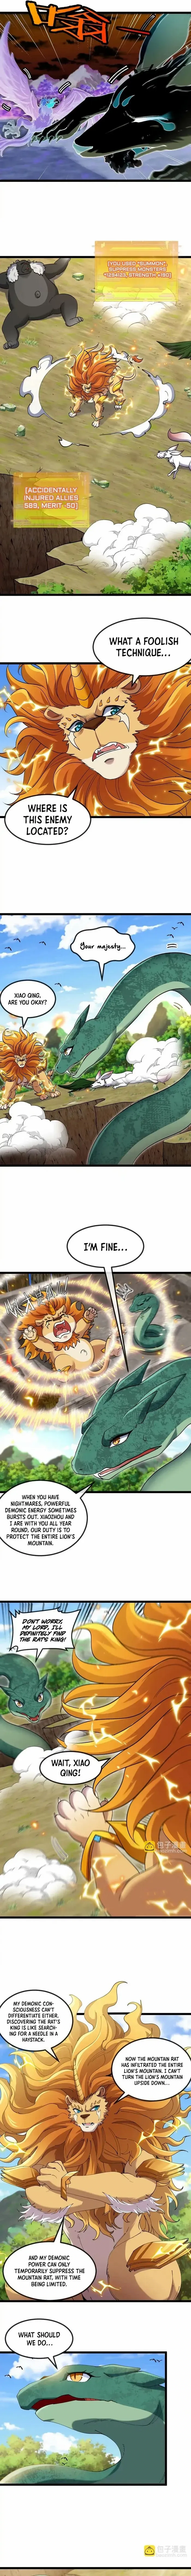 The Golden Lion King - Page 2